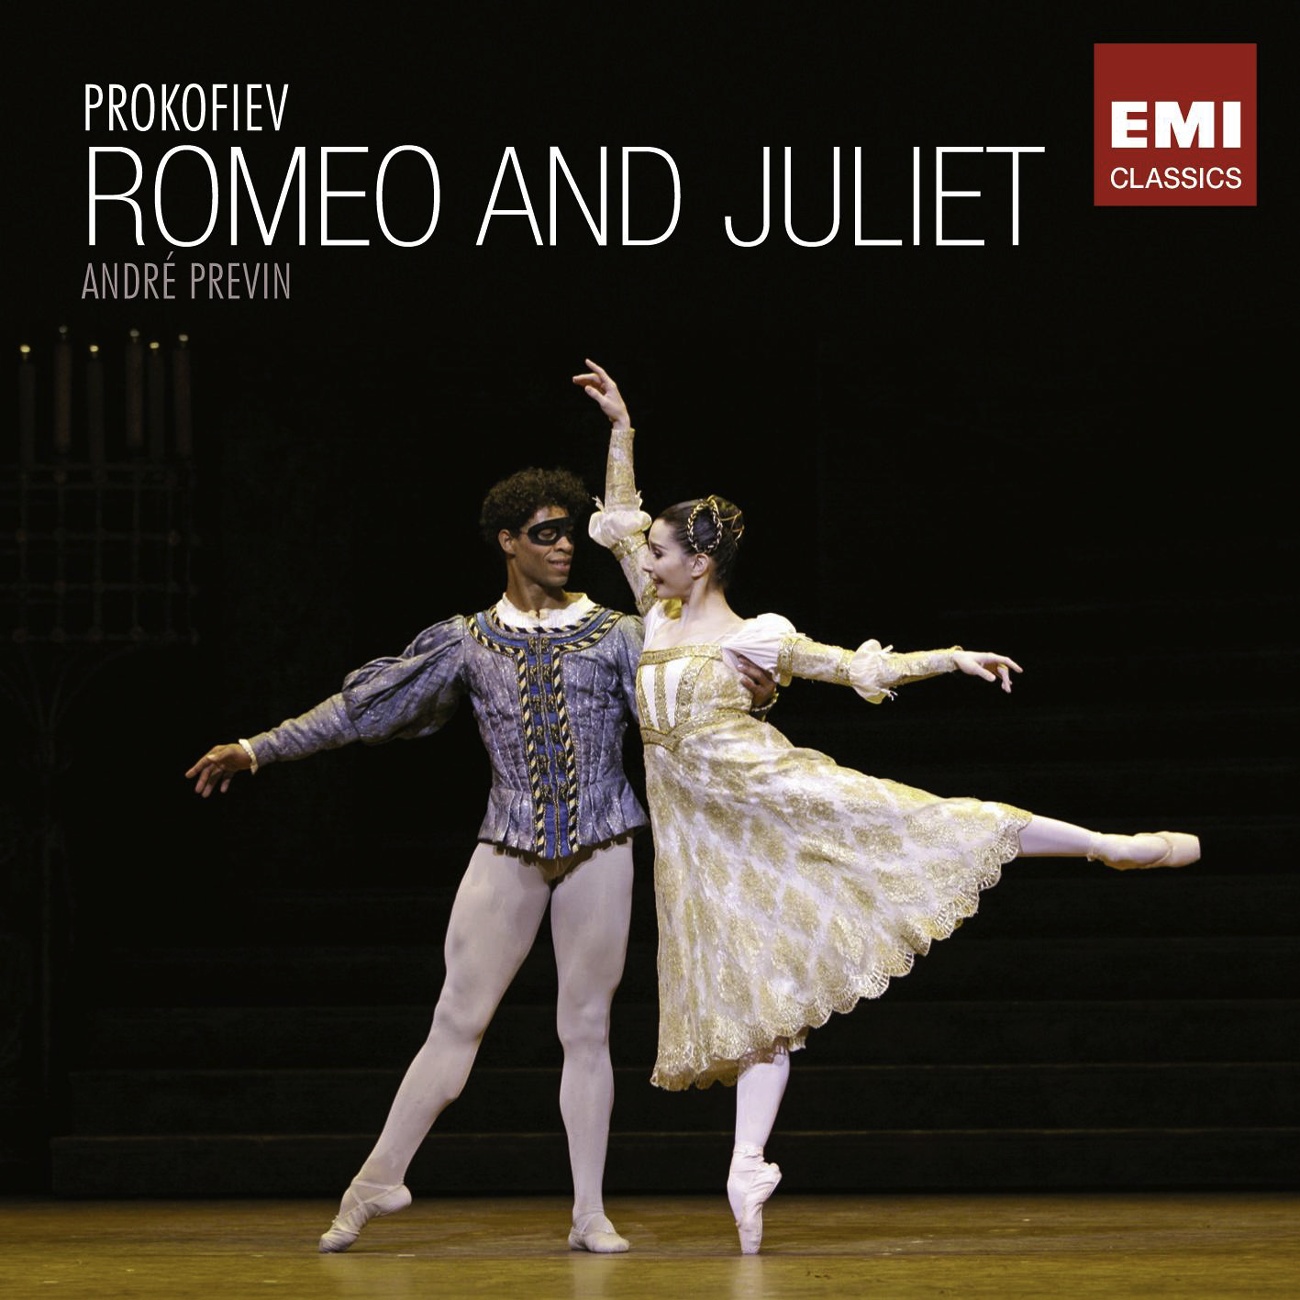 Romeo and Juliet Op. 64, Act III: At Friar Laurence's